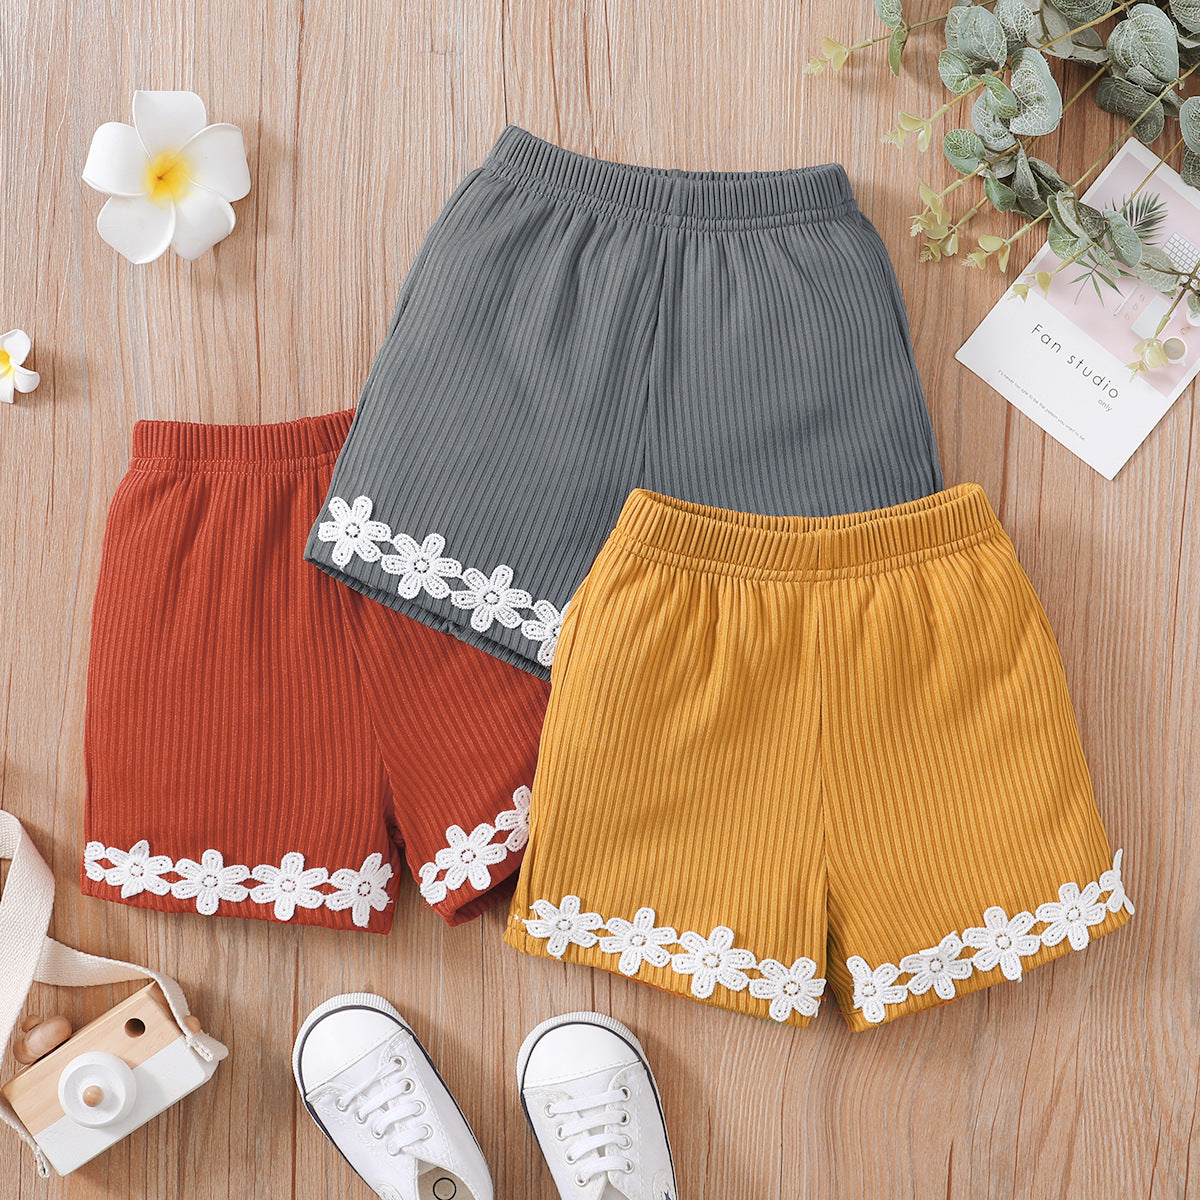 Toddler Boys Girls Solid Rubber Band Lace Elastic Waist Shorts